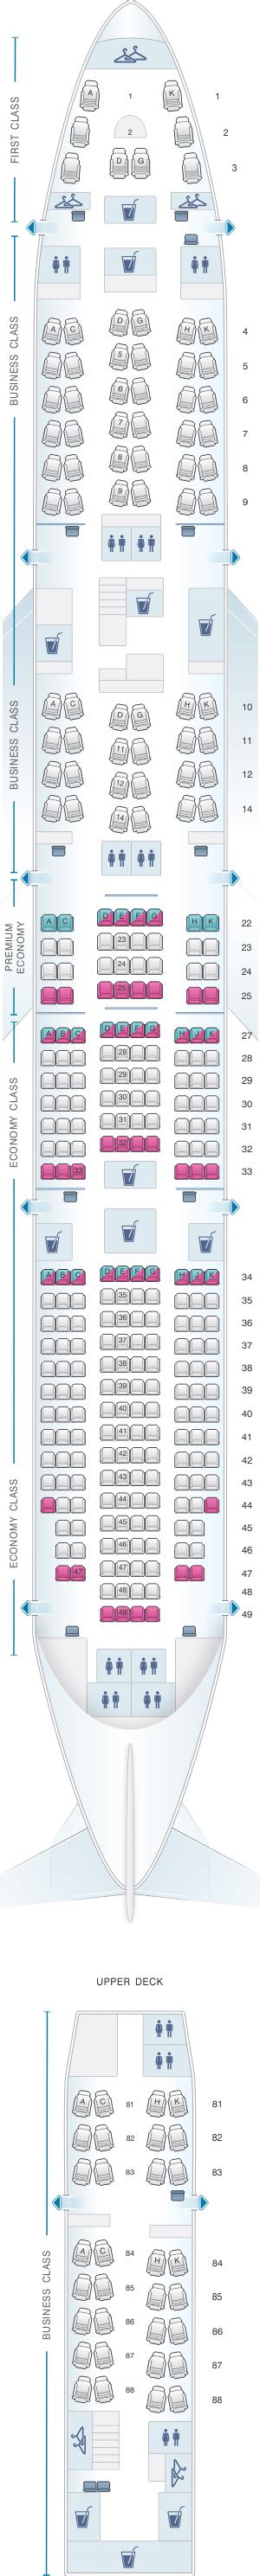 Lufthansa 747 8 Business Class Seat Map Lacy Steinberg